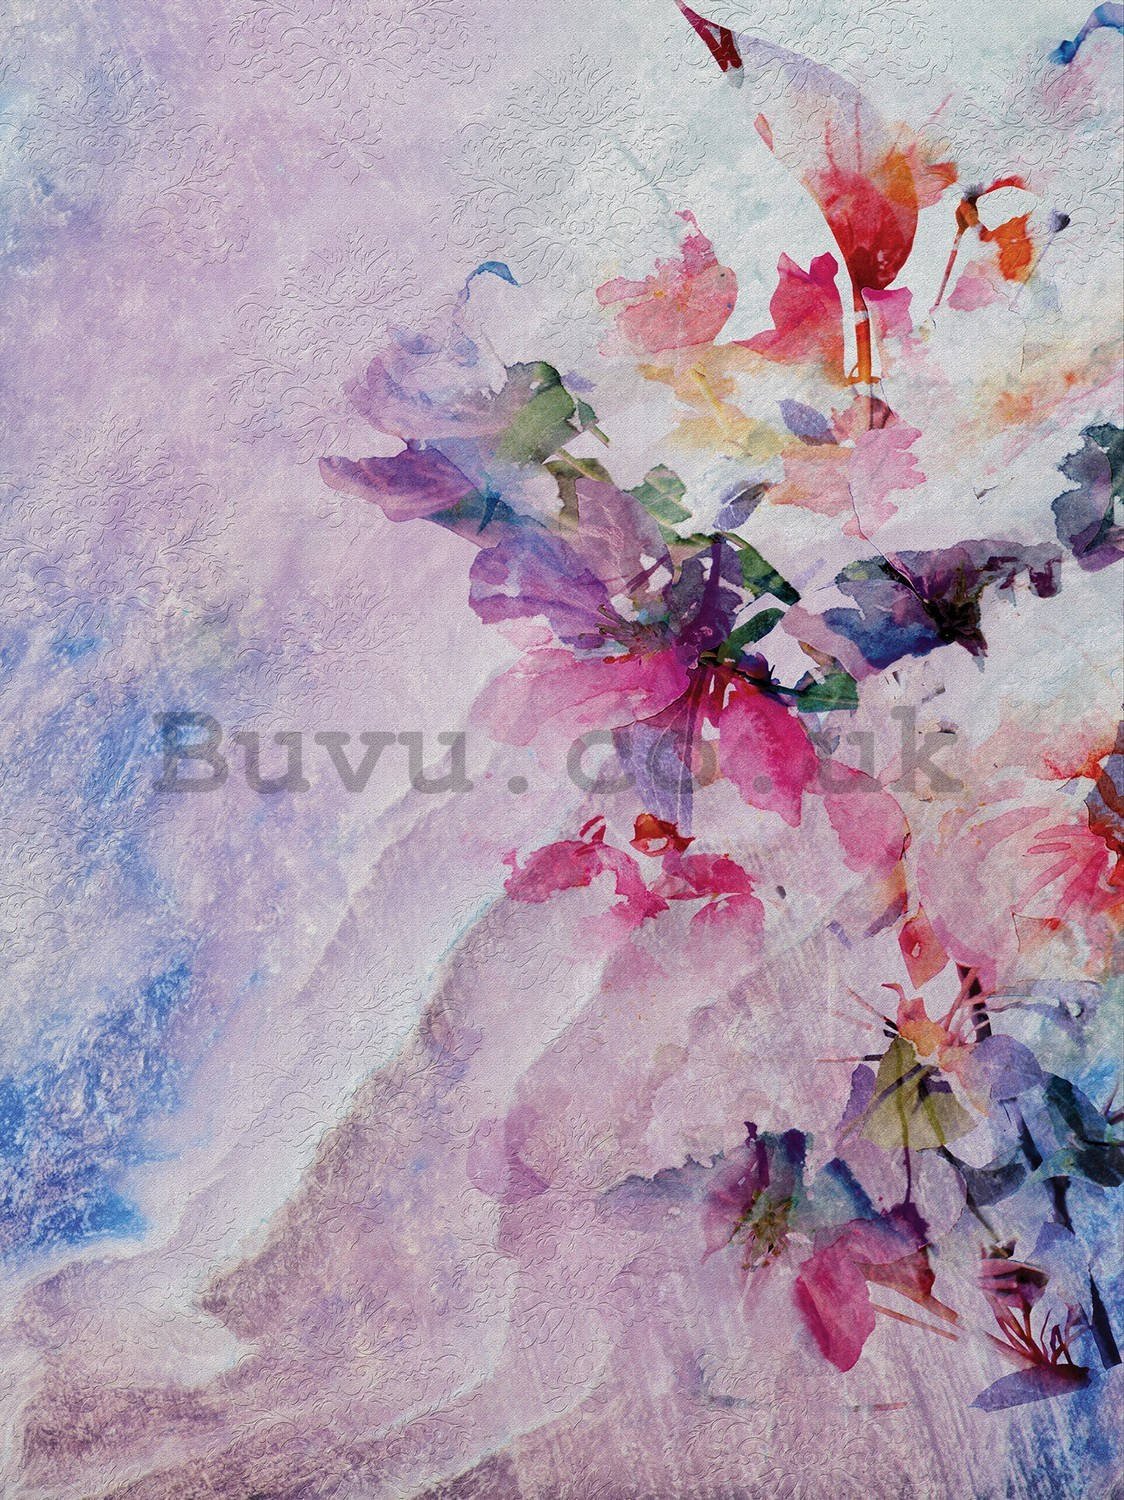 Wall mural: Multicolored floral abstraction - 184x254 cm